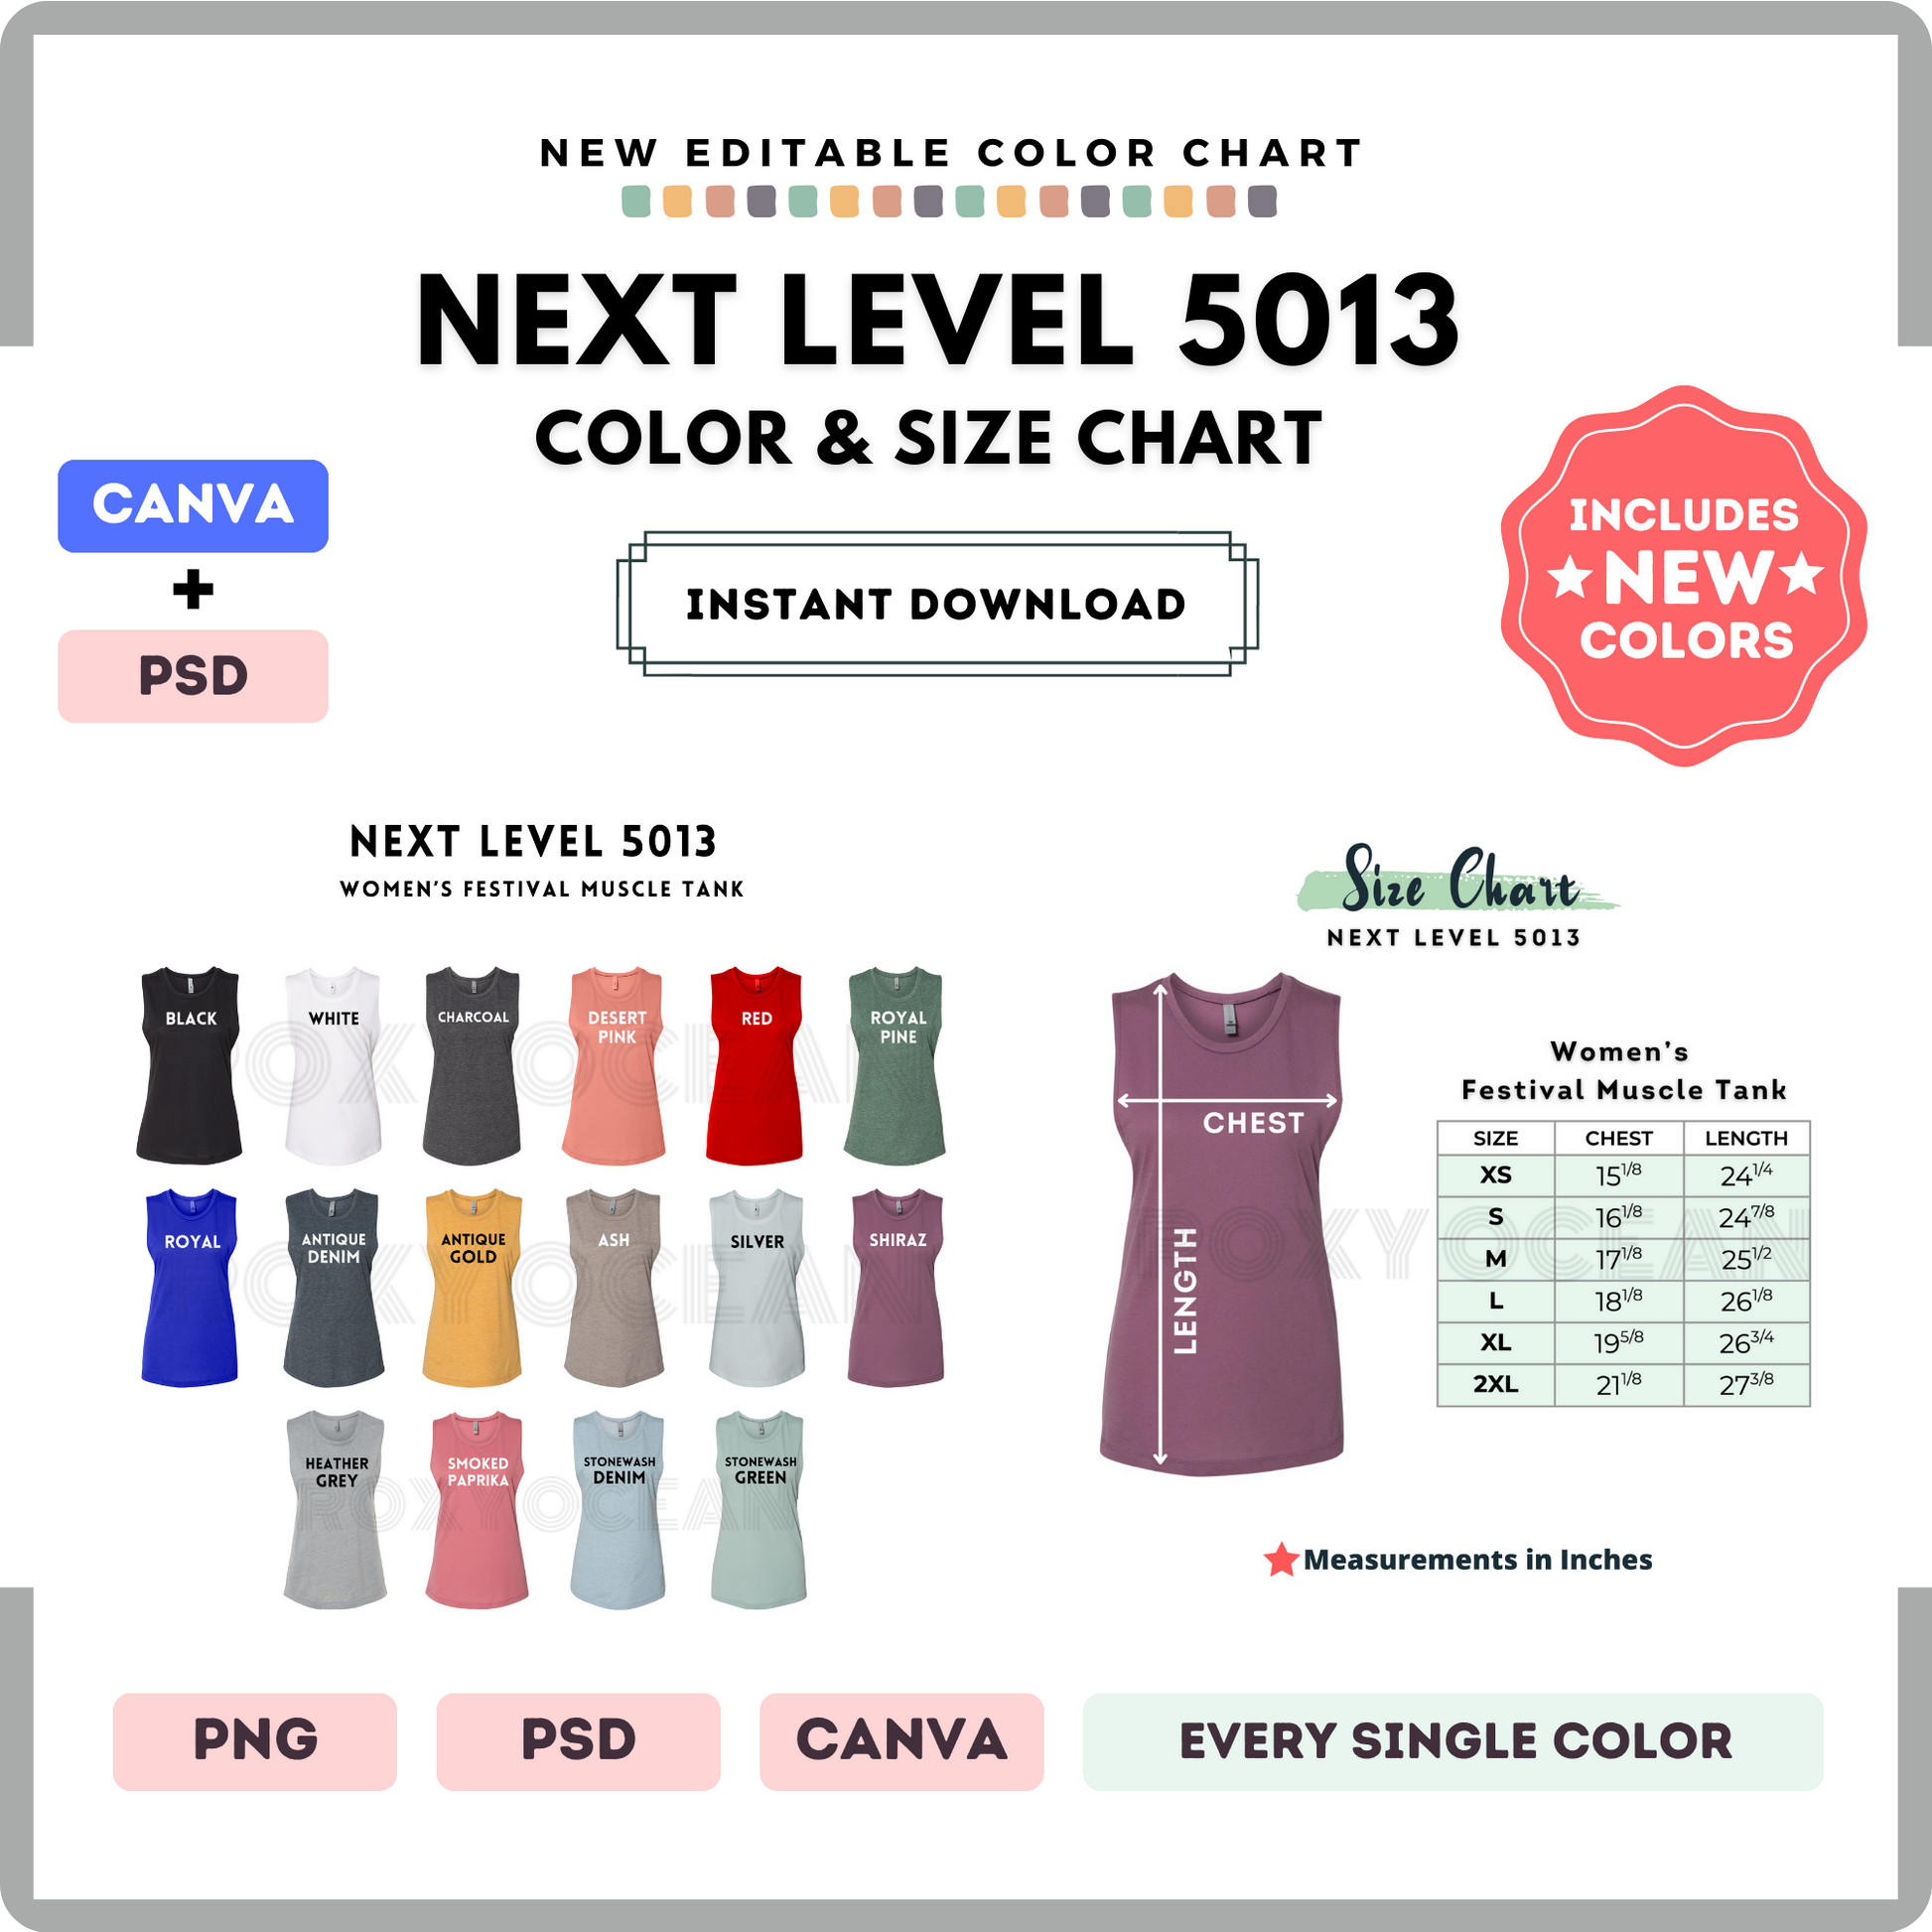 Next Level 5013 Color and Size Chart